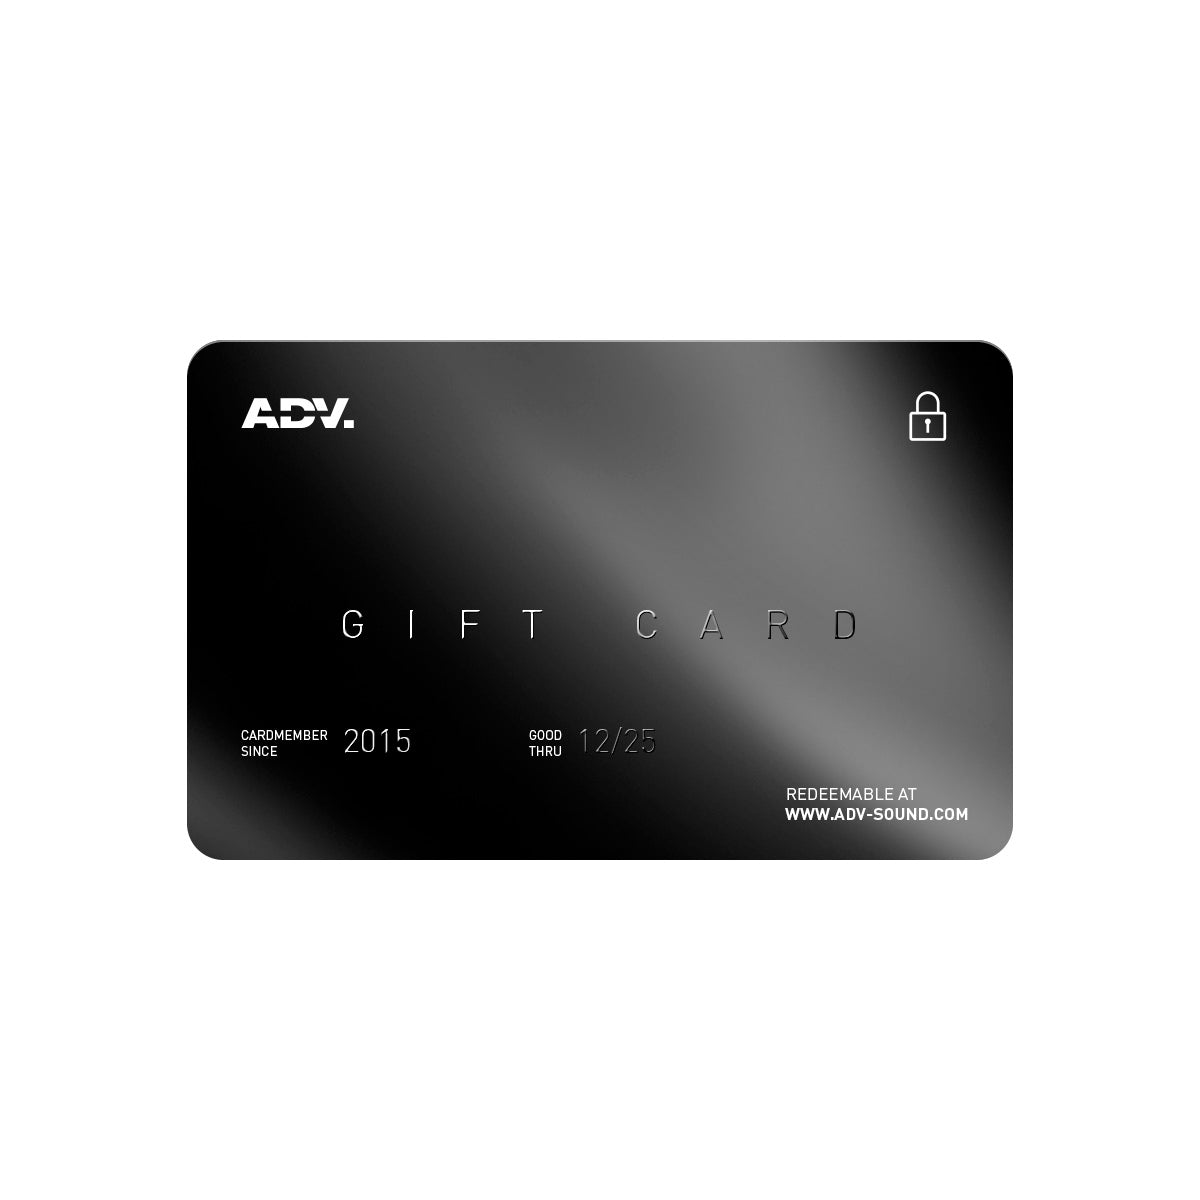 ADV. gift card redeemable at www.adv-sound.com